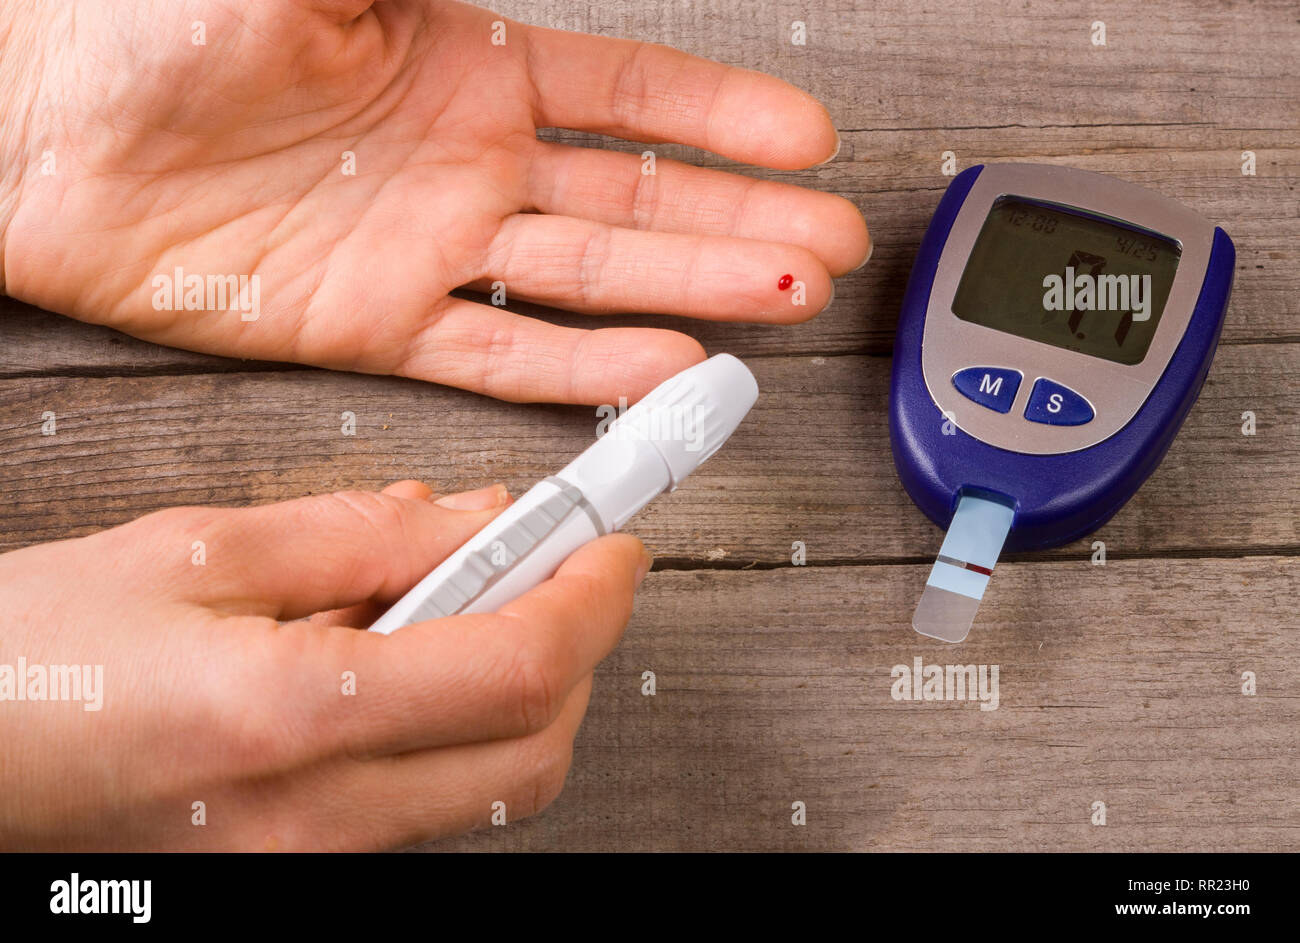 https://c8.alamy.com/comp/RR23H0/blood-glucose-meter-with-a-hand-on-an-old-wooden-background-RR23H0.jpg